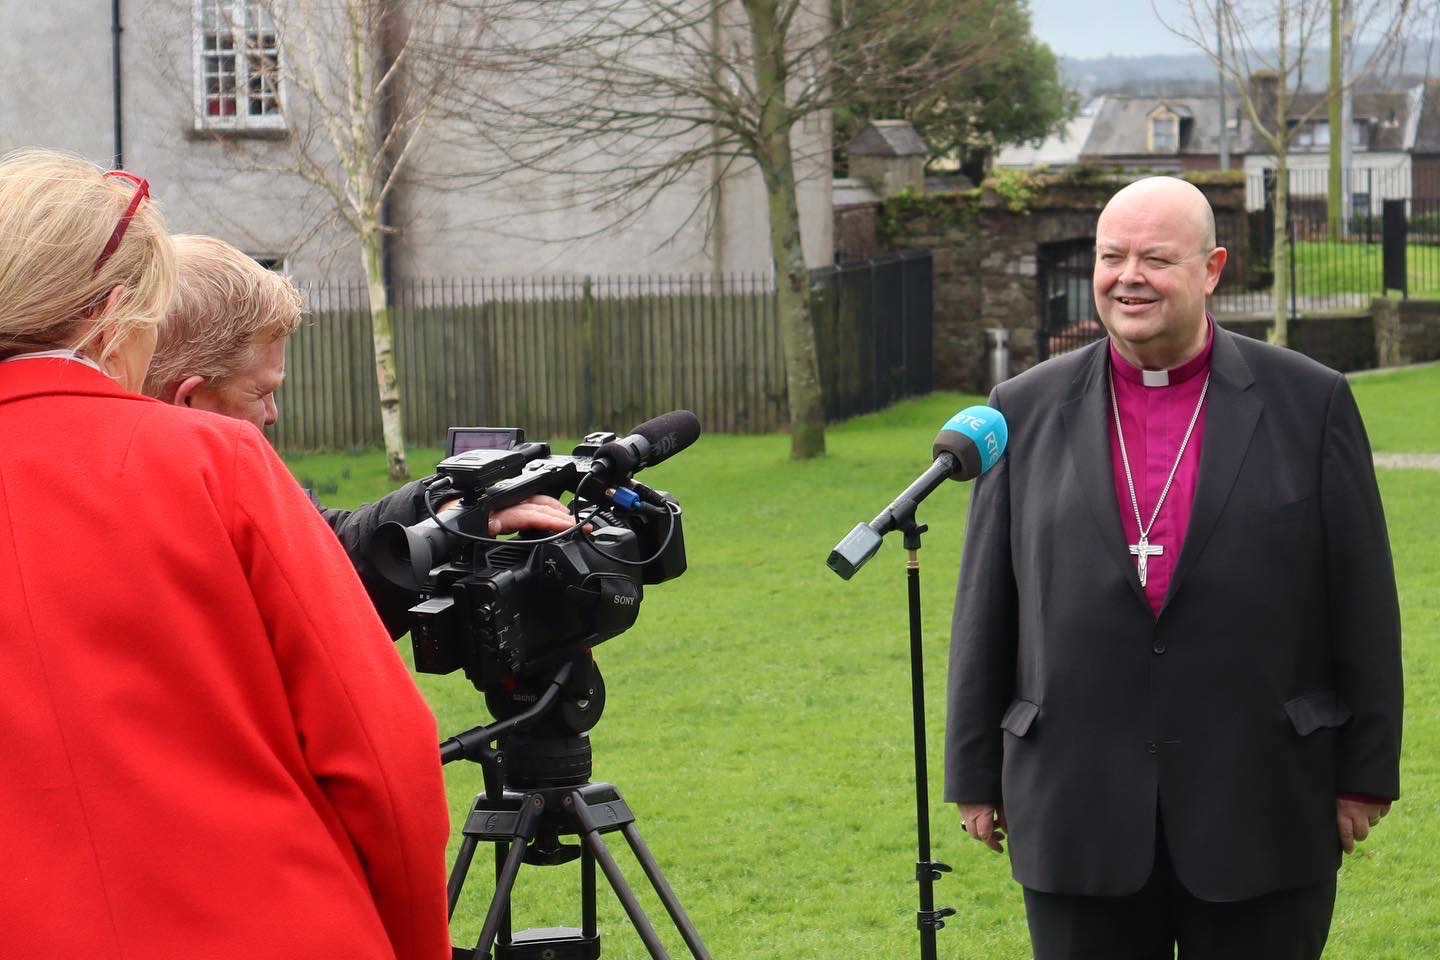 Bishop Paul giving an interview to RTÉ in the ground of Saint Anne's Church, Shandon.